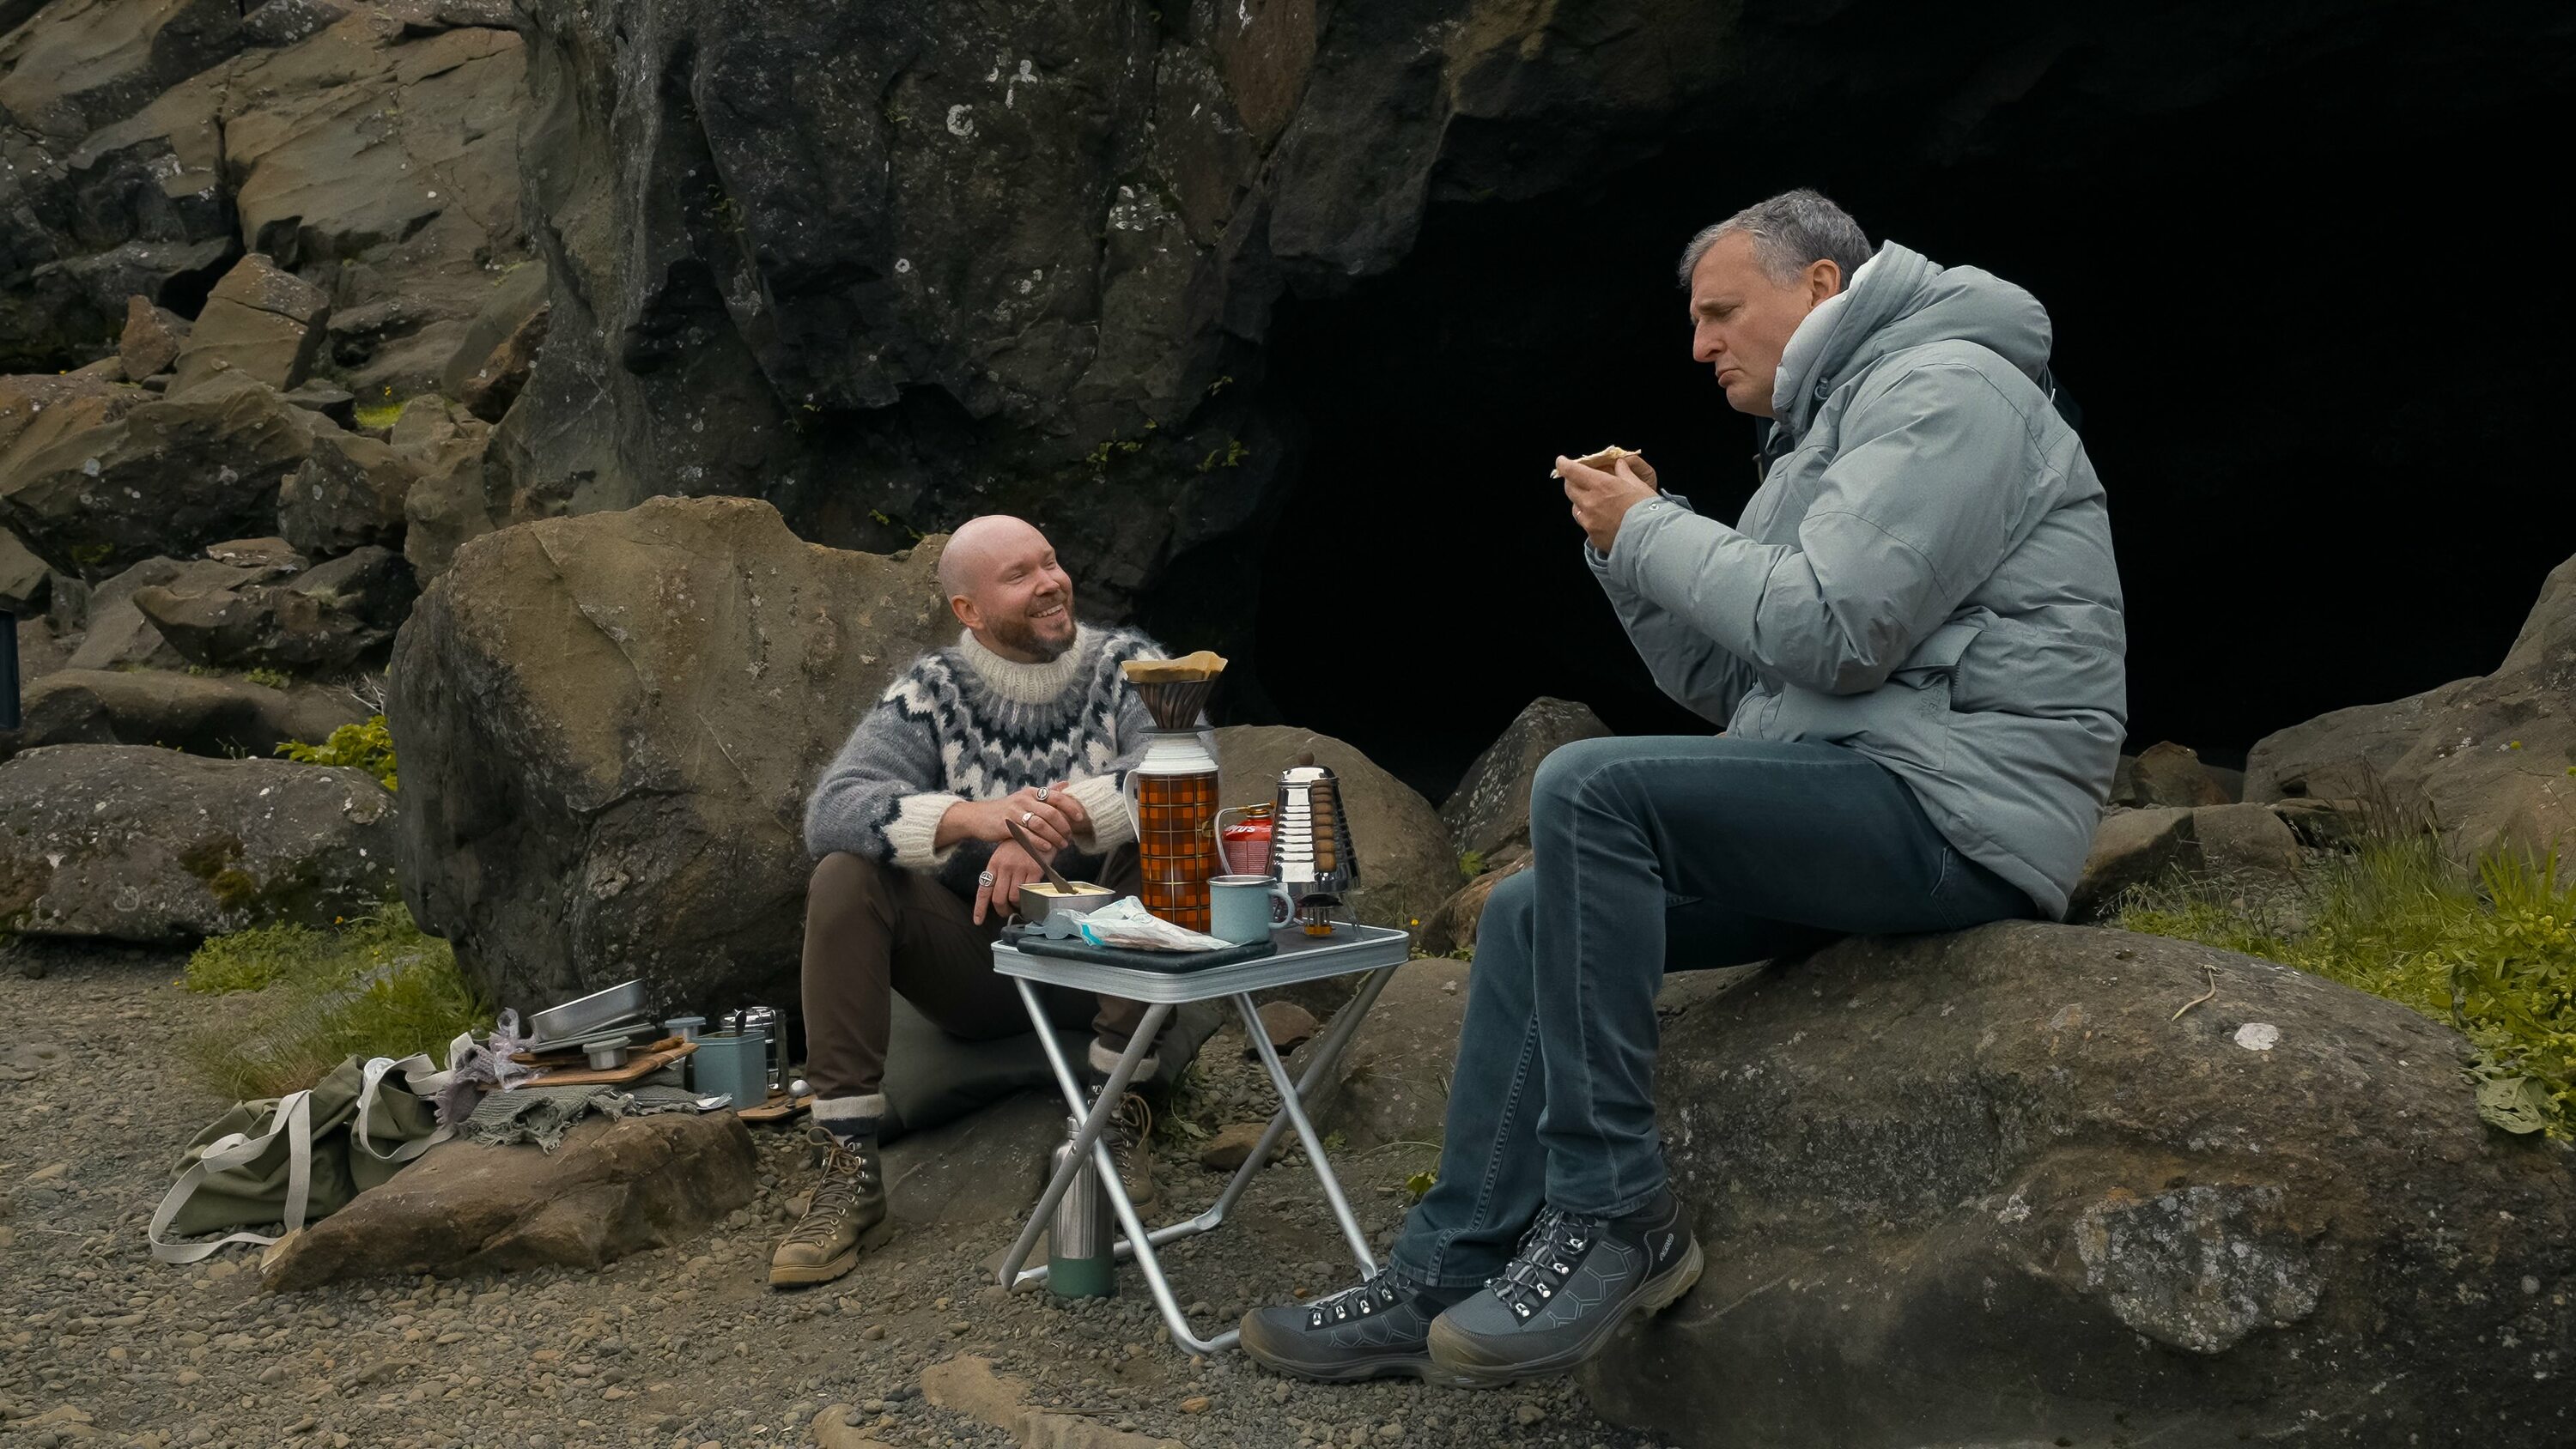 Two people sitting on rocks outside with food and drinks